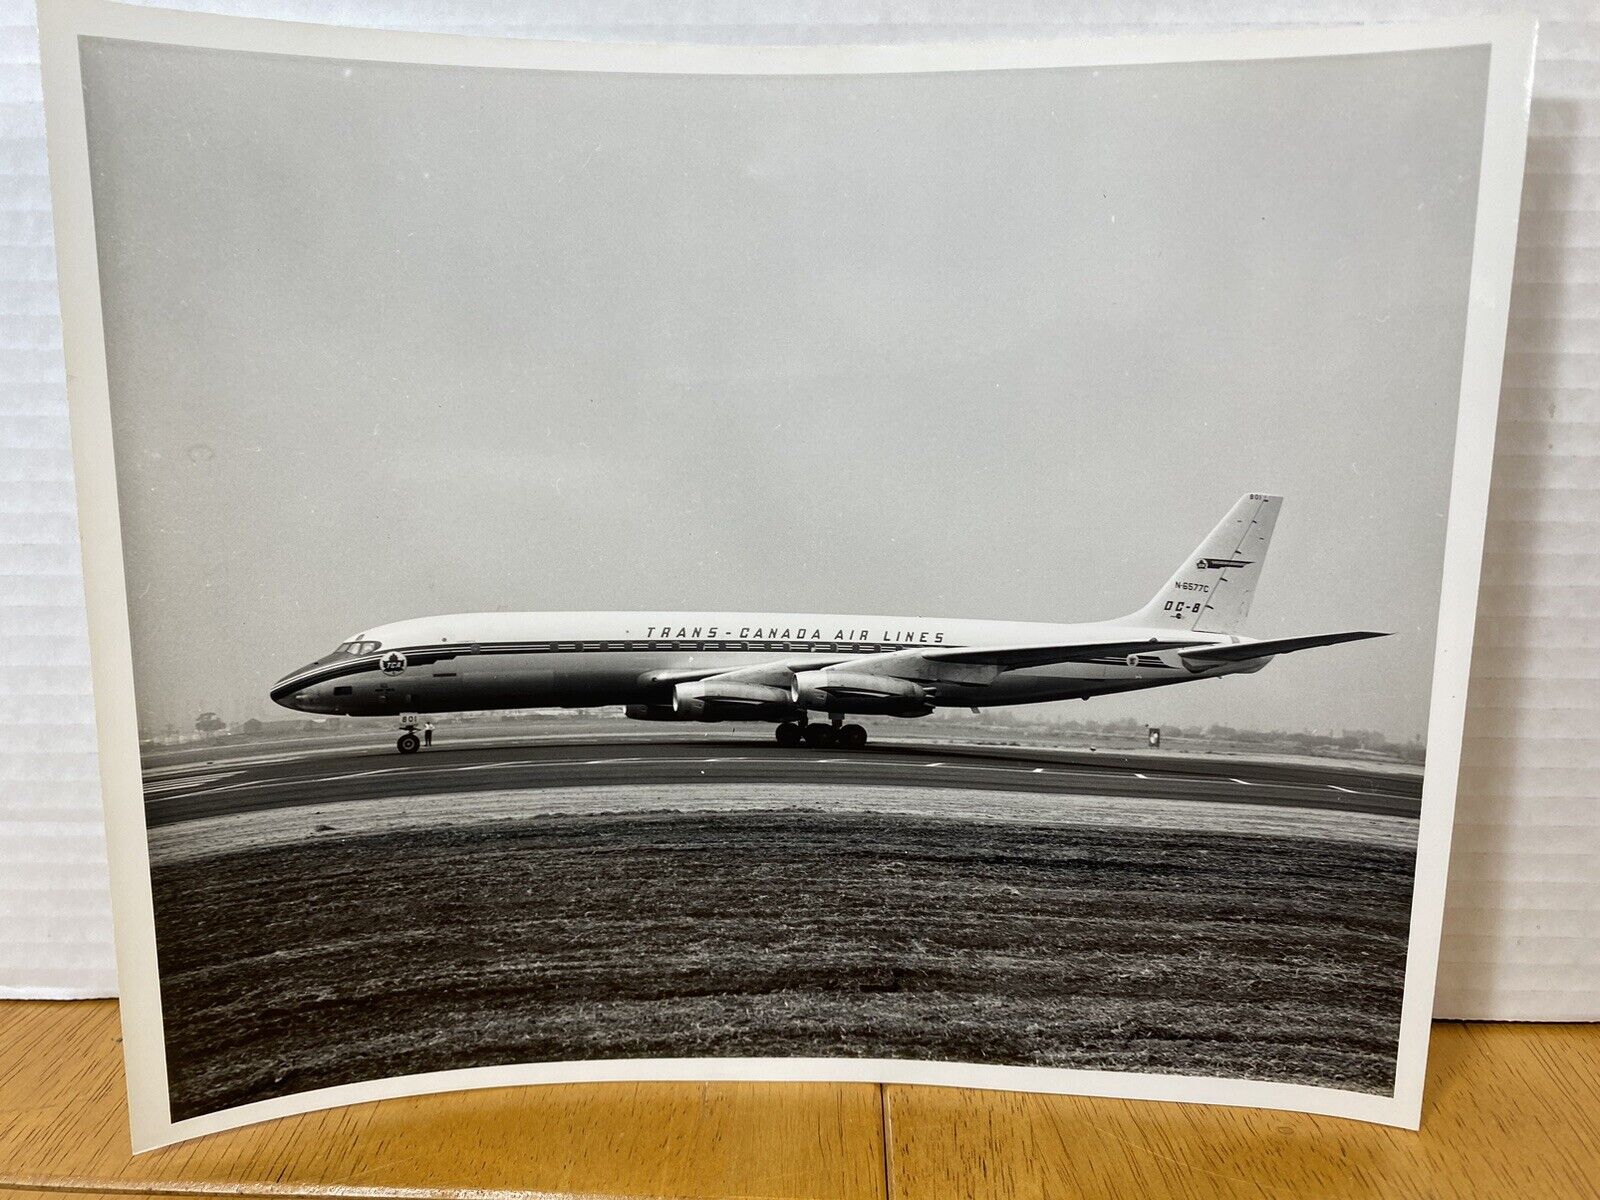 DOUGLAS DC-8 TRANS CANADA AIR LINES VTG STAMPED ON THE BACK C 2284-1